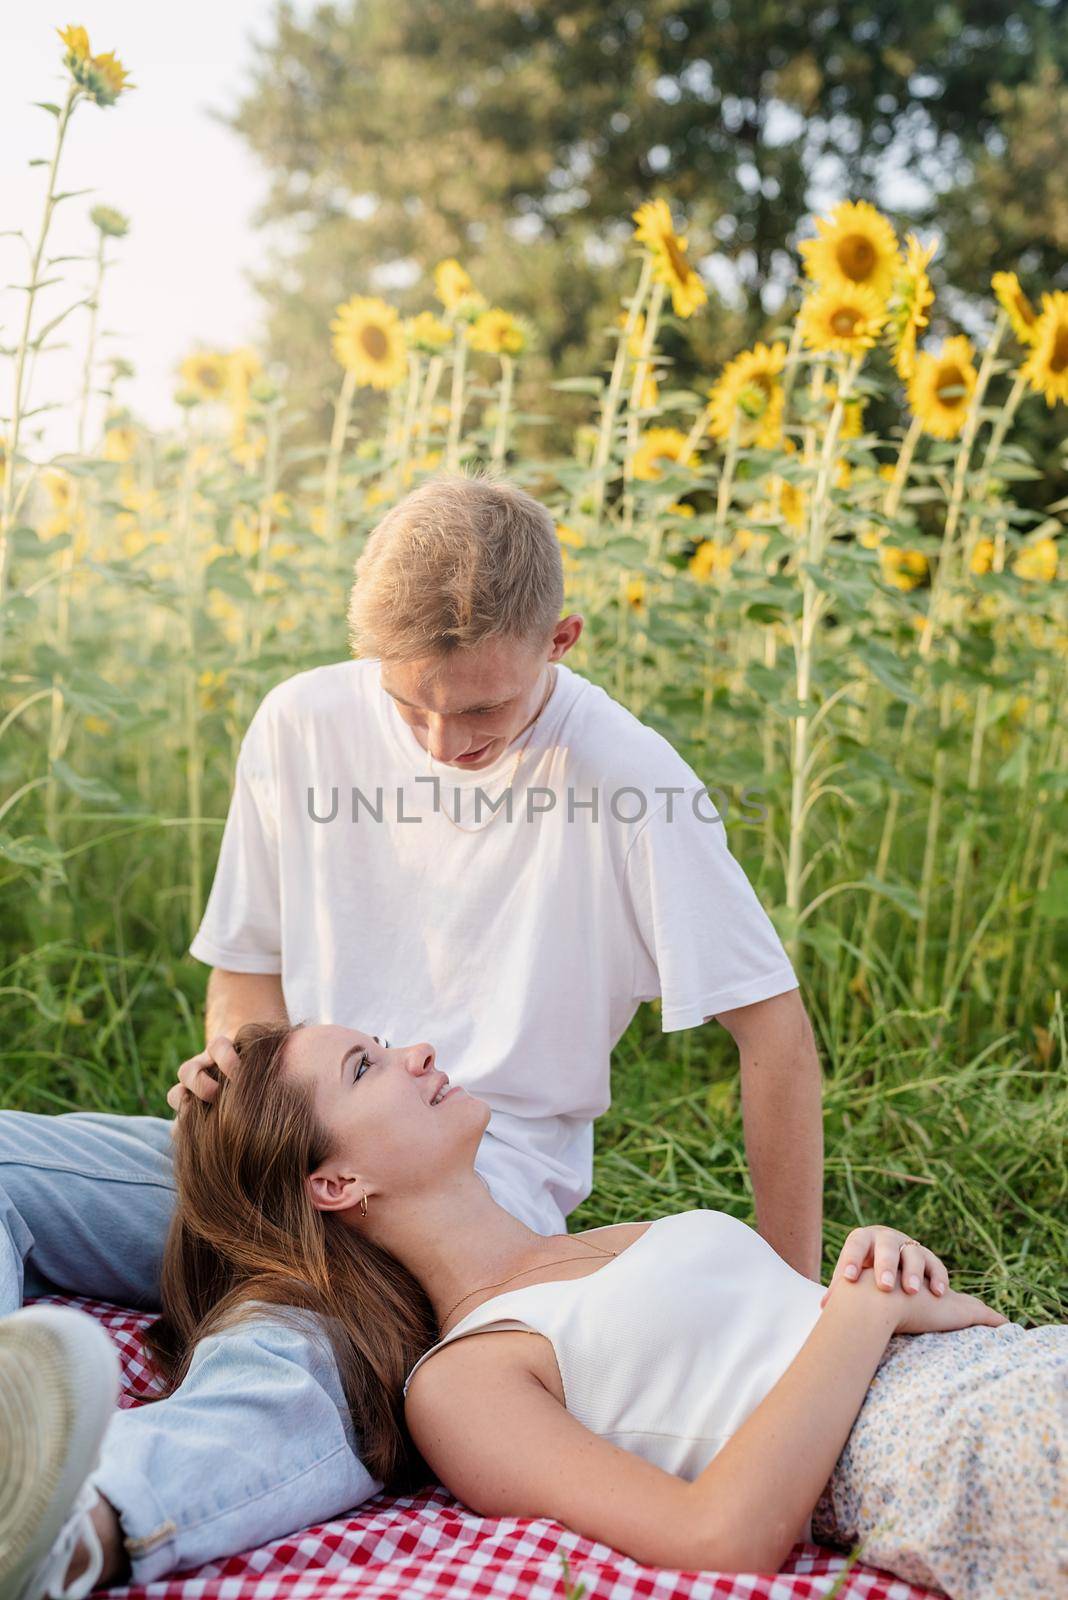 Autumn nature. Fun and liesure. Young teenage couple picnic on sunflower field in sunset, enjoying time together